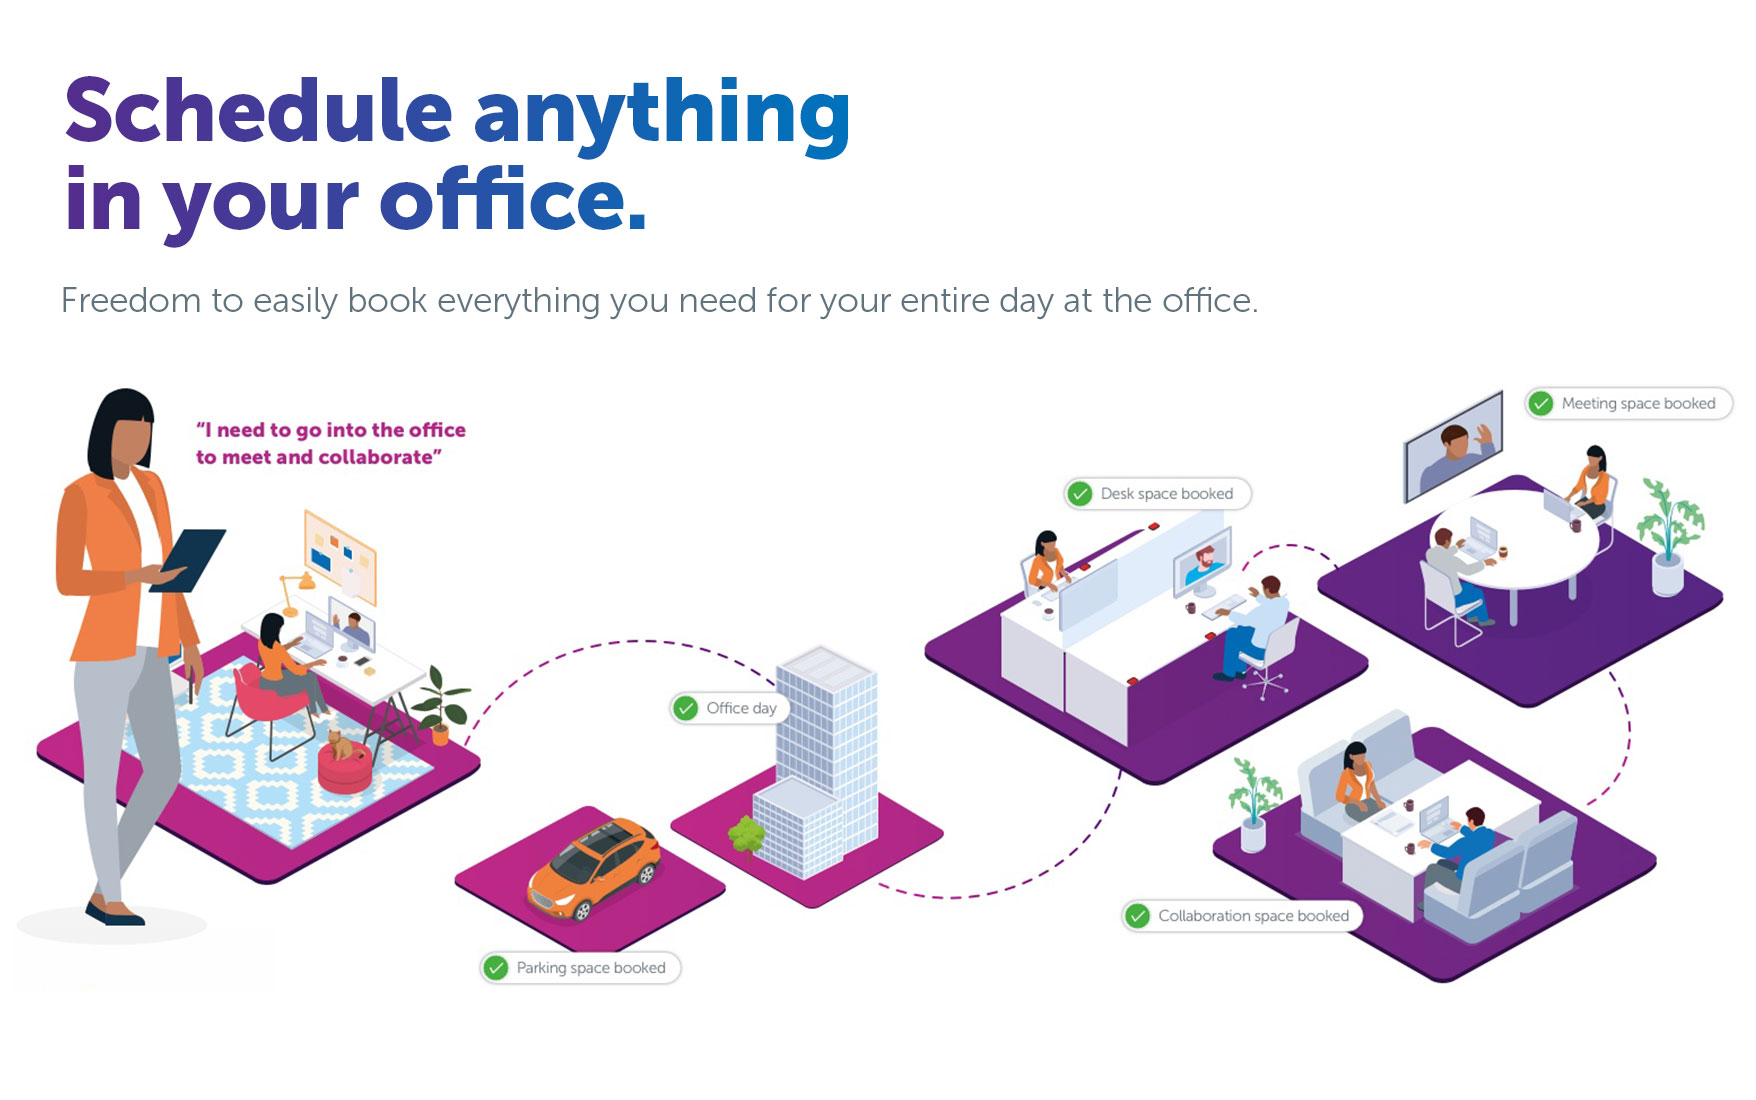 #ScheduleAnything, not everything - 2021 workplace insights